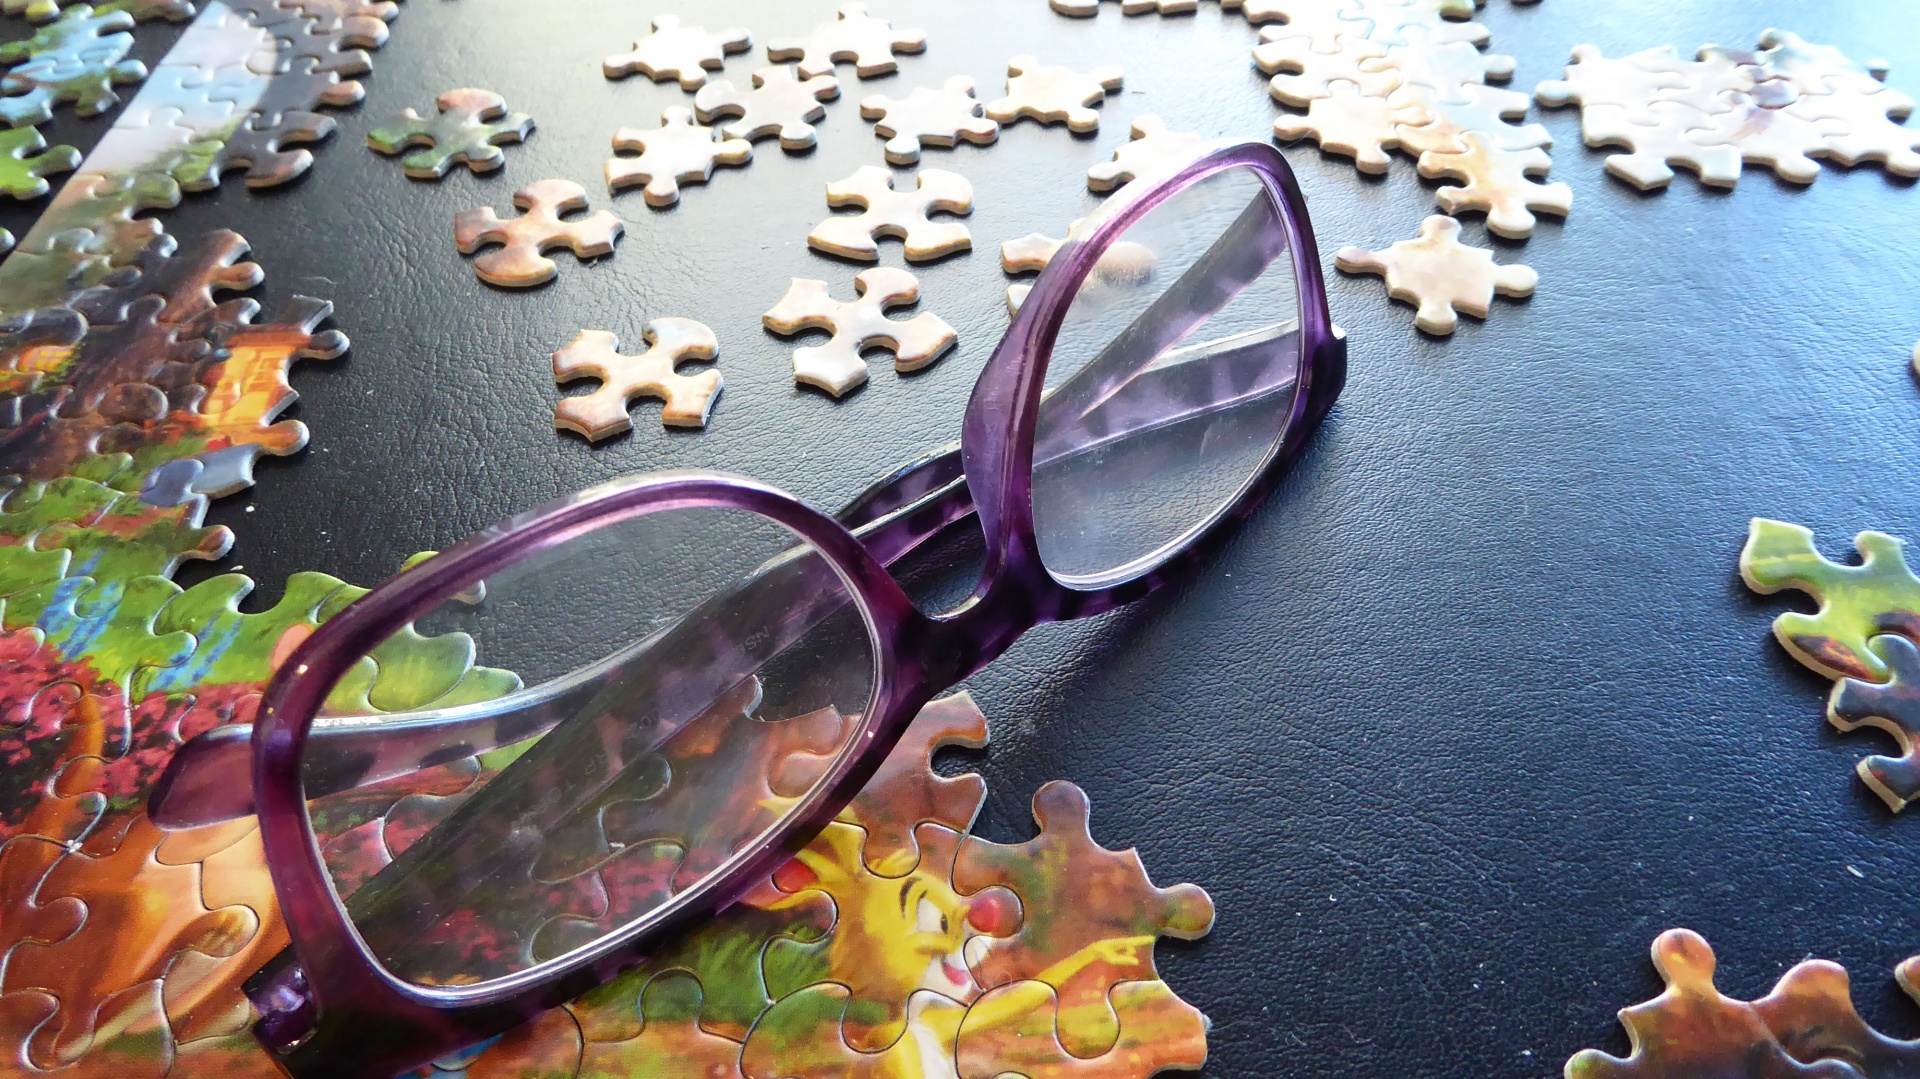 Jigsaw puzzle and a pair of eyeglasses